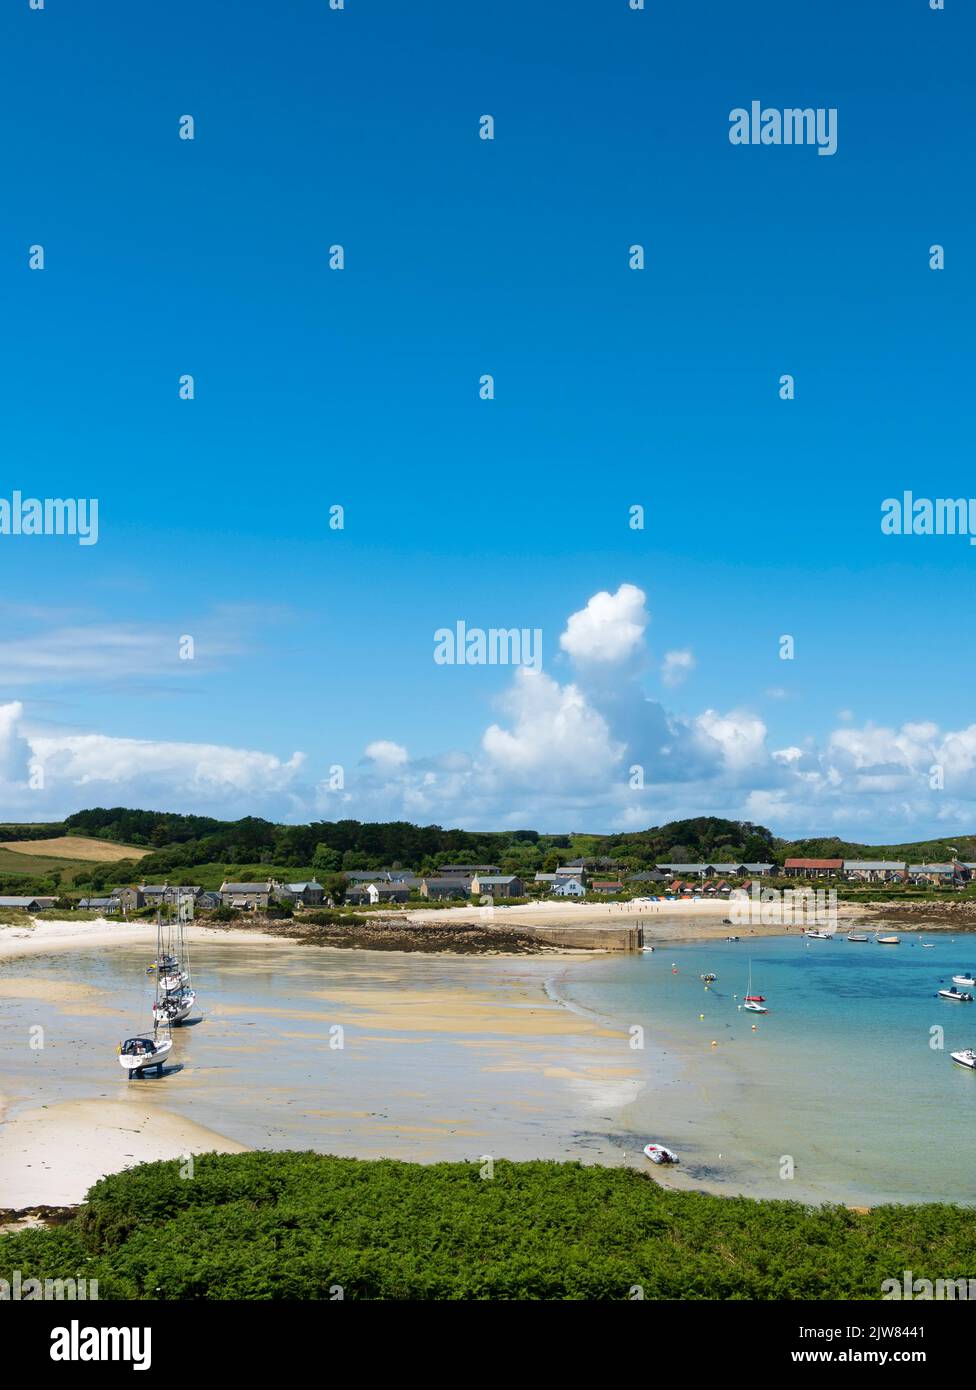 Old Grimsby, Tresco, Isles of Scilly, Cornwall, England, UK. Stock Photo